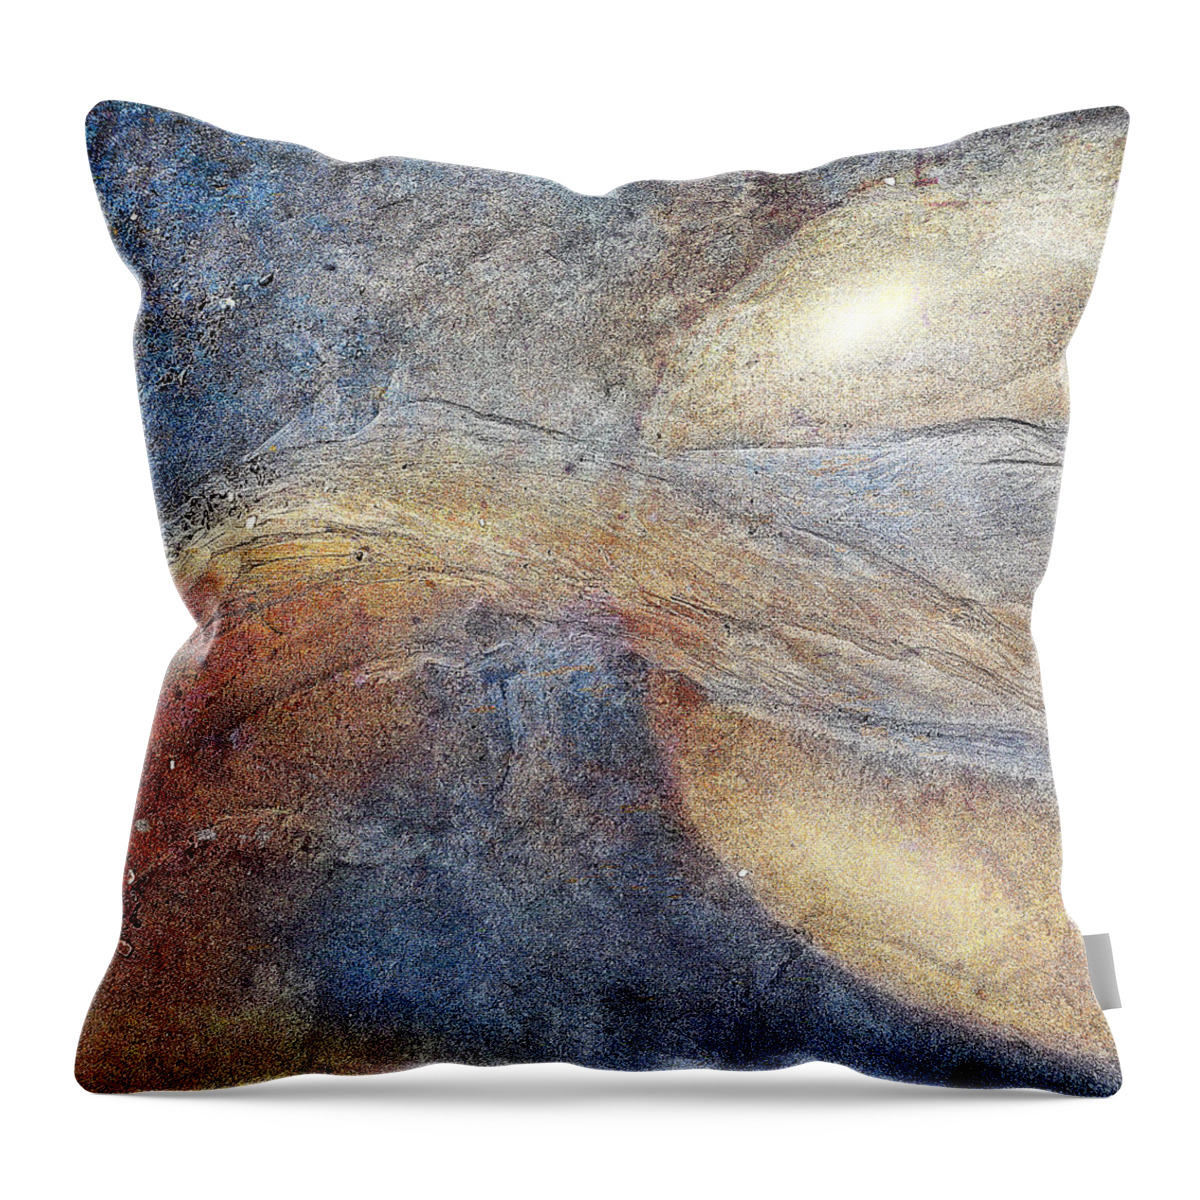 Digital Throw Pillow featuring the digital art Abstract 9 by Rick Mosher